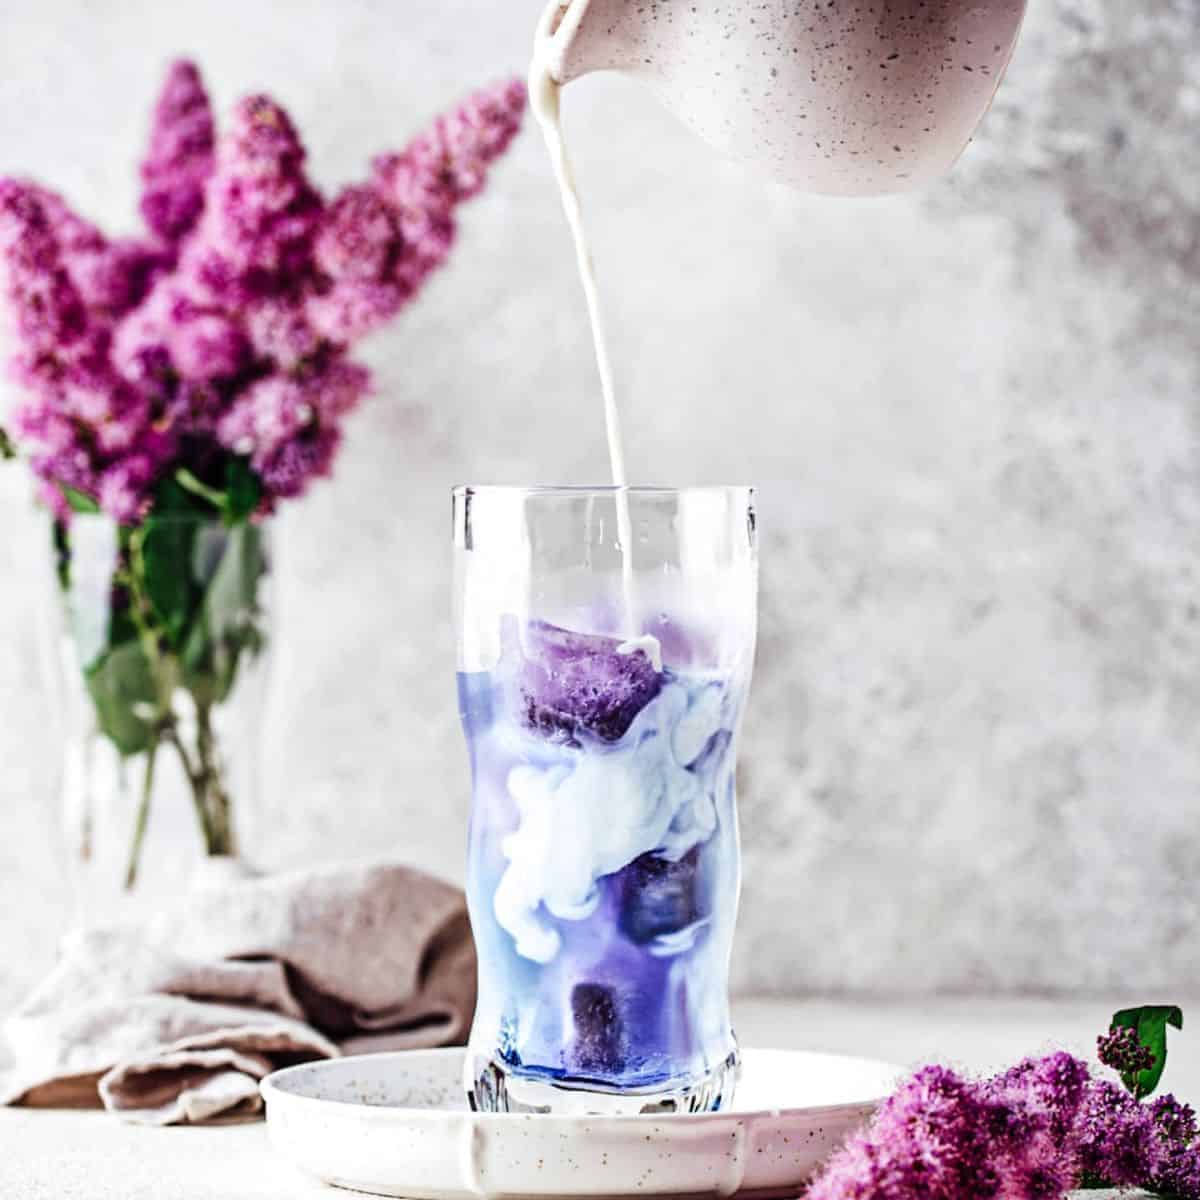 A milk poured in a transparent glass of purplish drink with pink flowers fading on the background